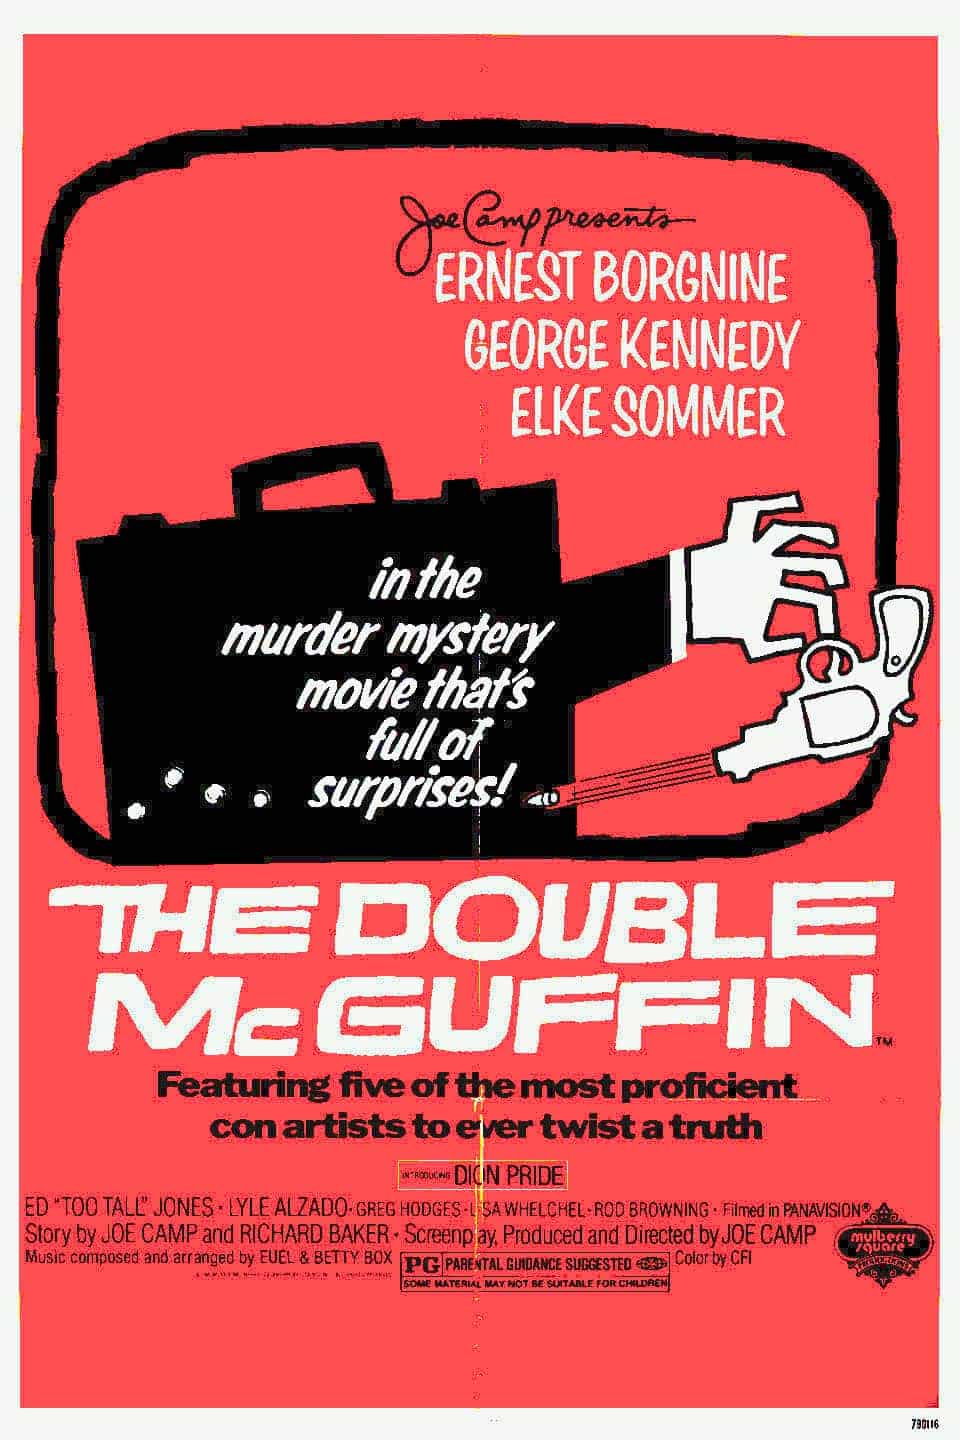 The Double Mcguffin